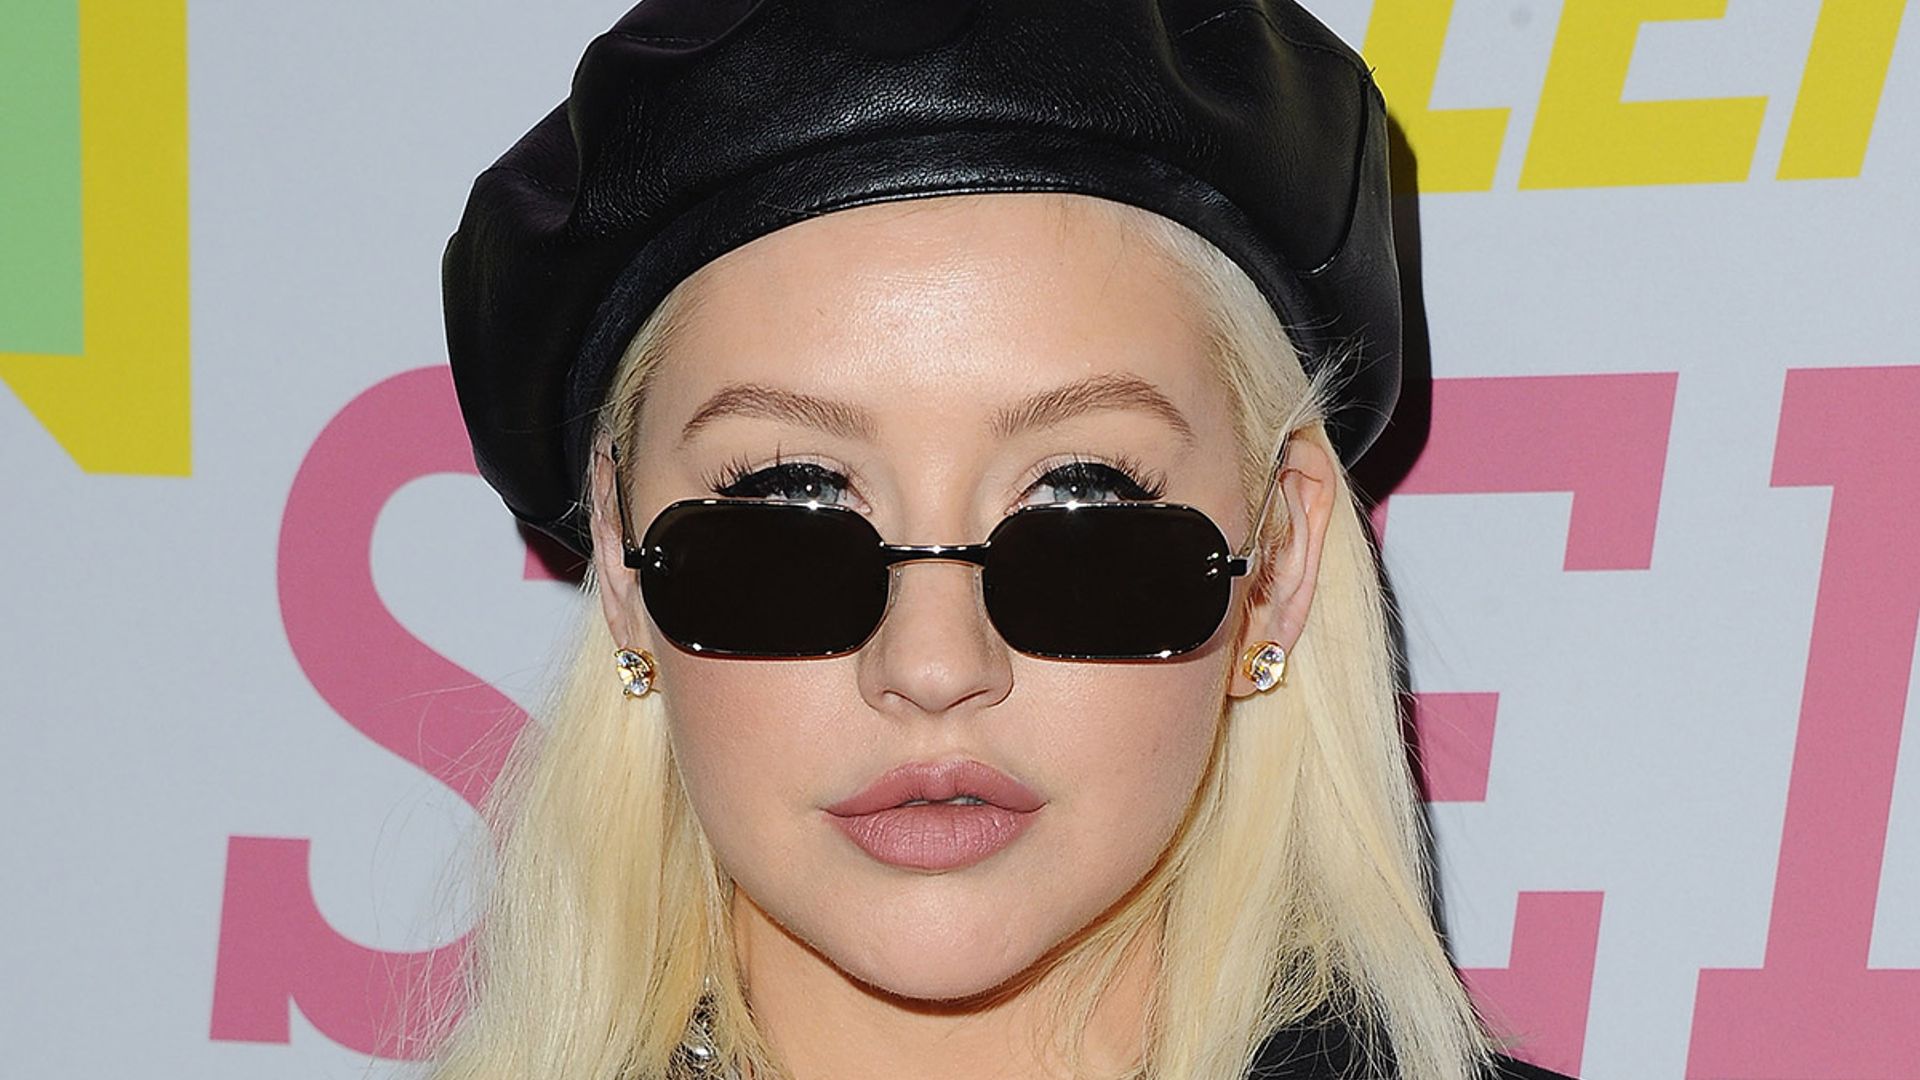 Christina Aguilera is a vision in black ahead of important event